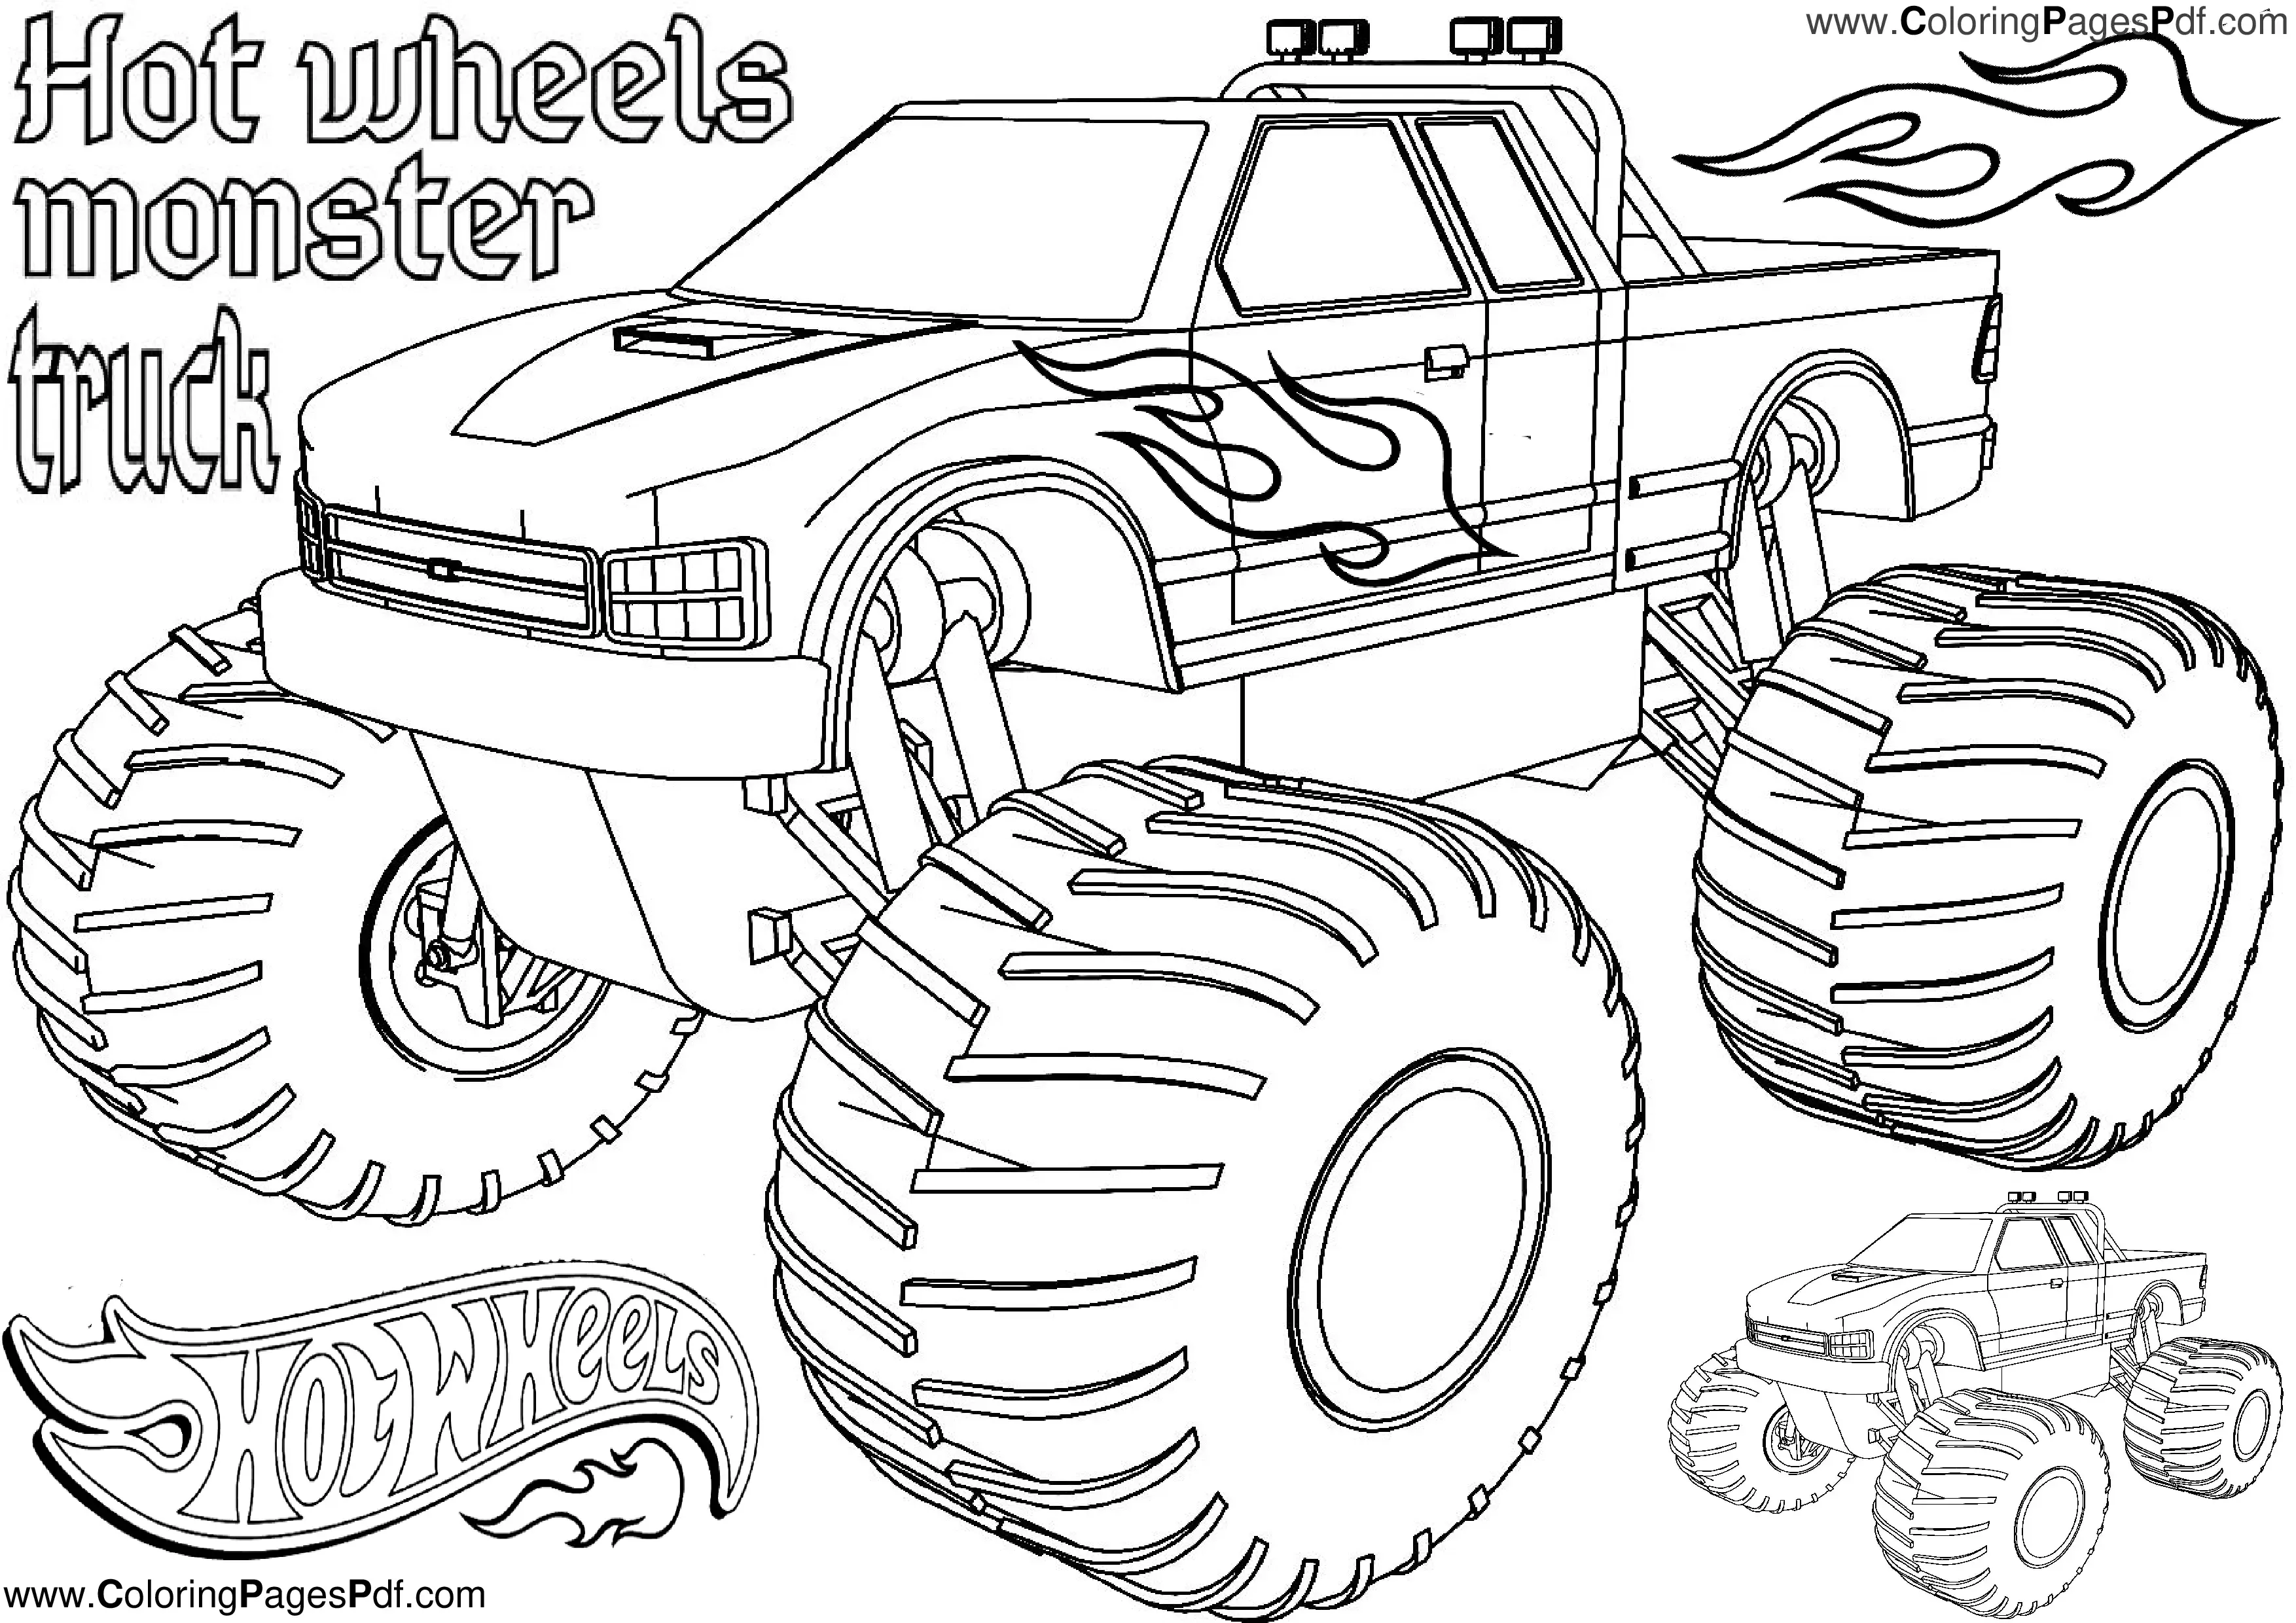 Hot wheels monster truck coloring pages